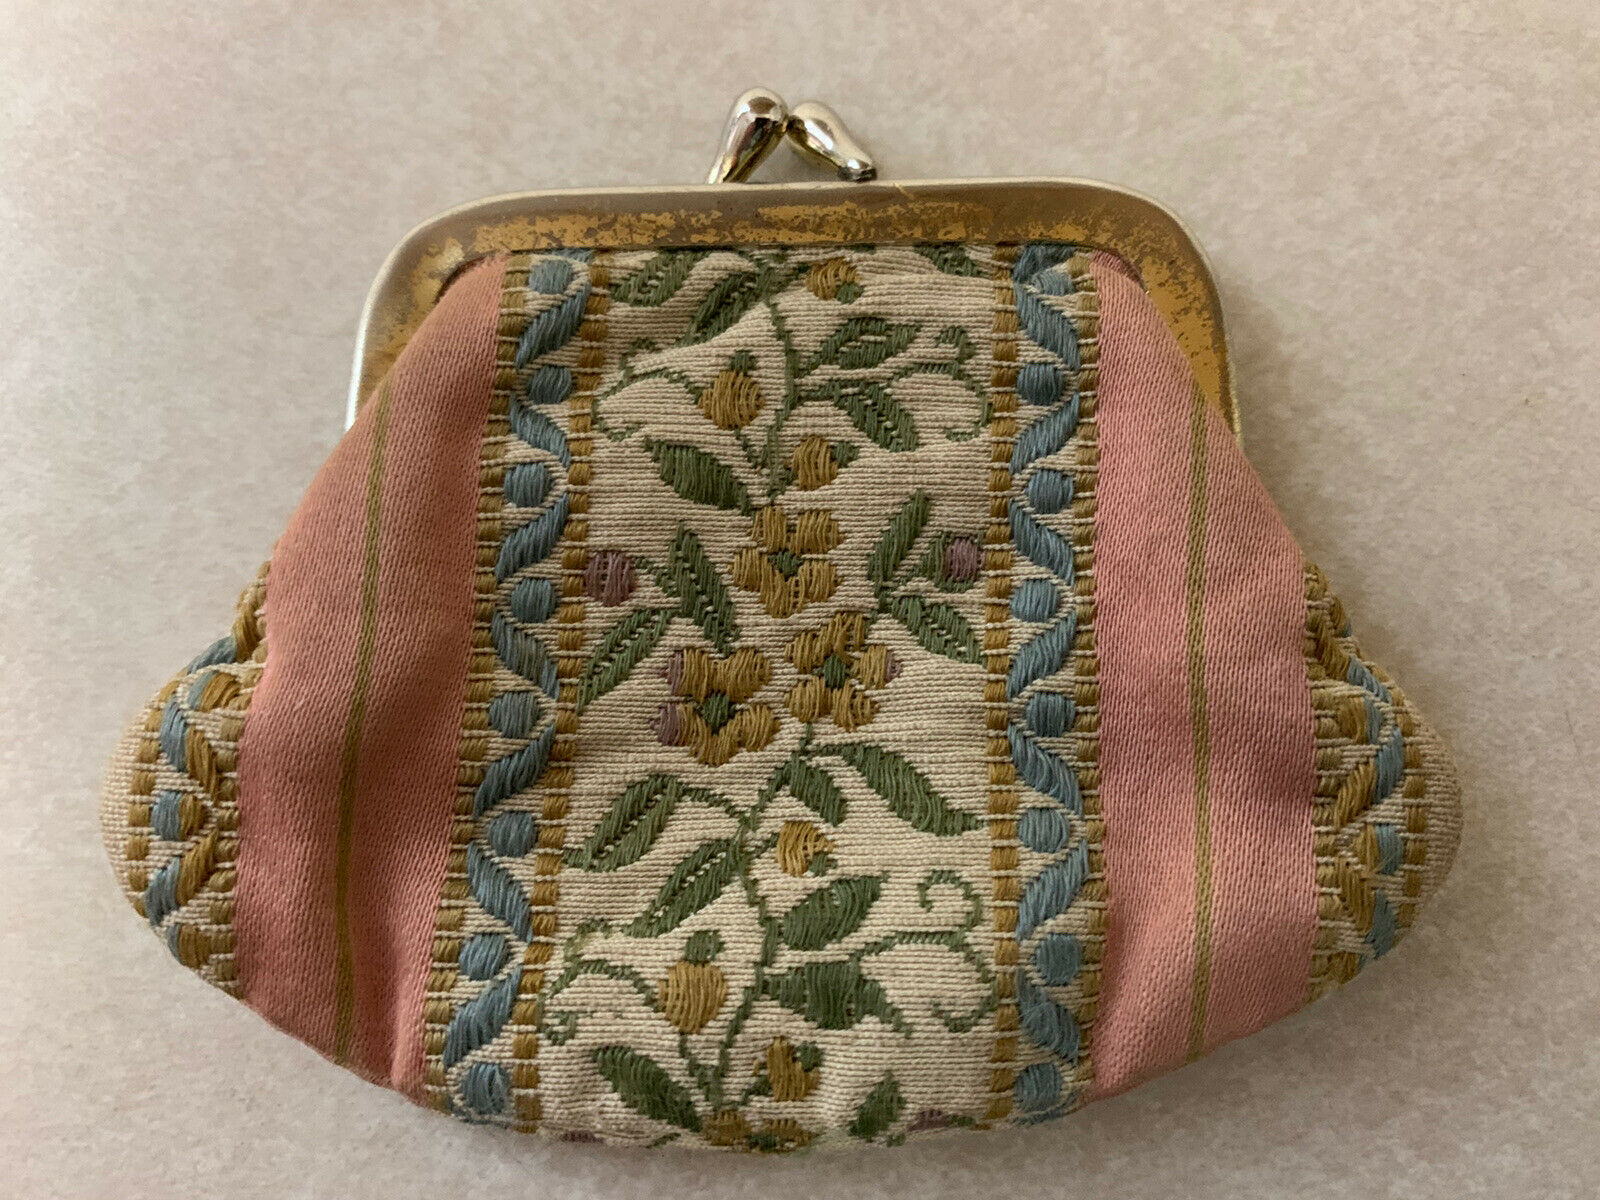 Vintage Extra Small Embroidered Change Coin Purse Metal Snap Clasp 3.5 X 3.25”